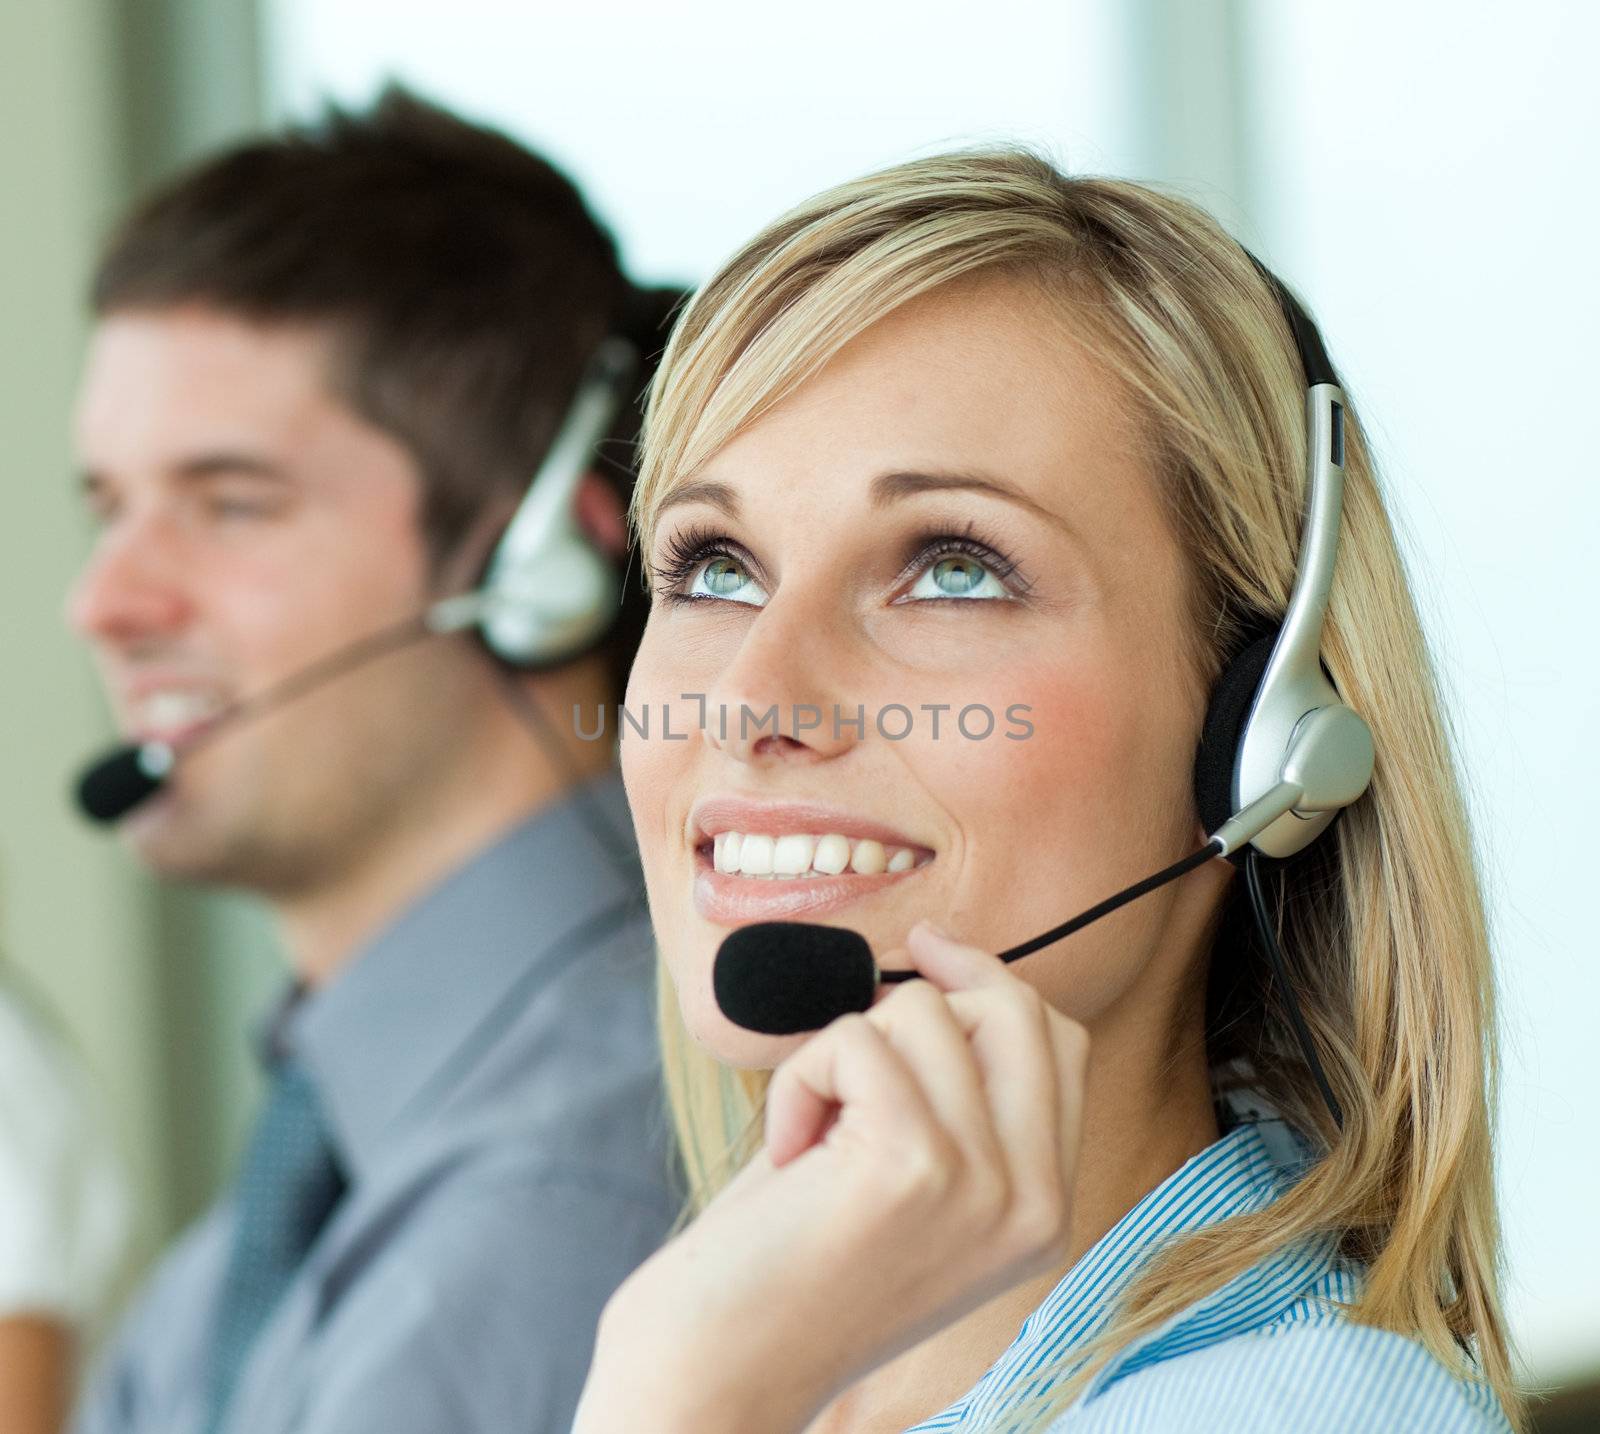 Two business people with headsets in an office